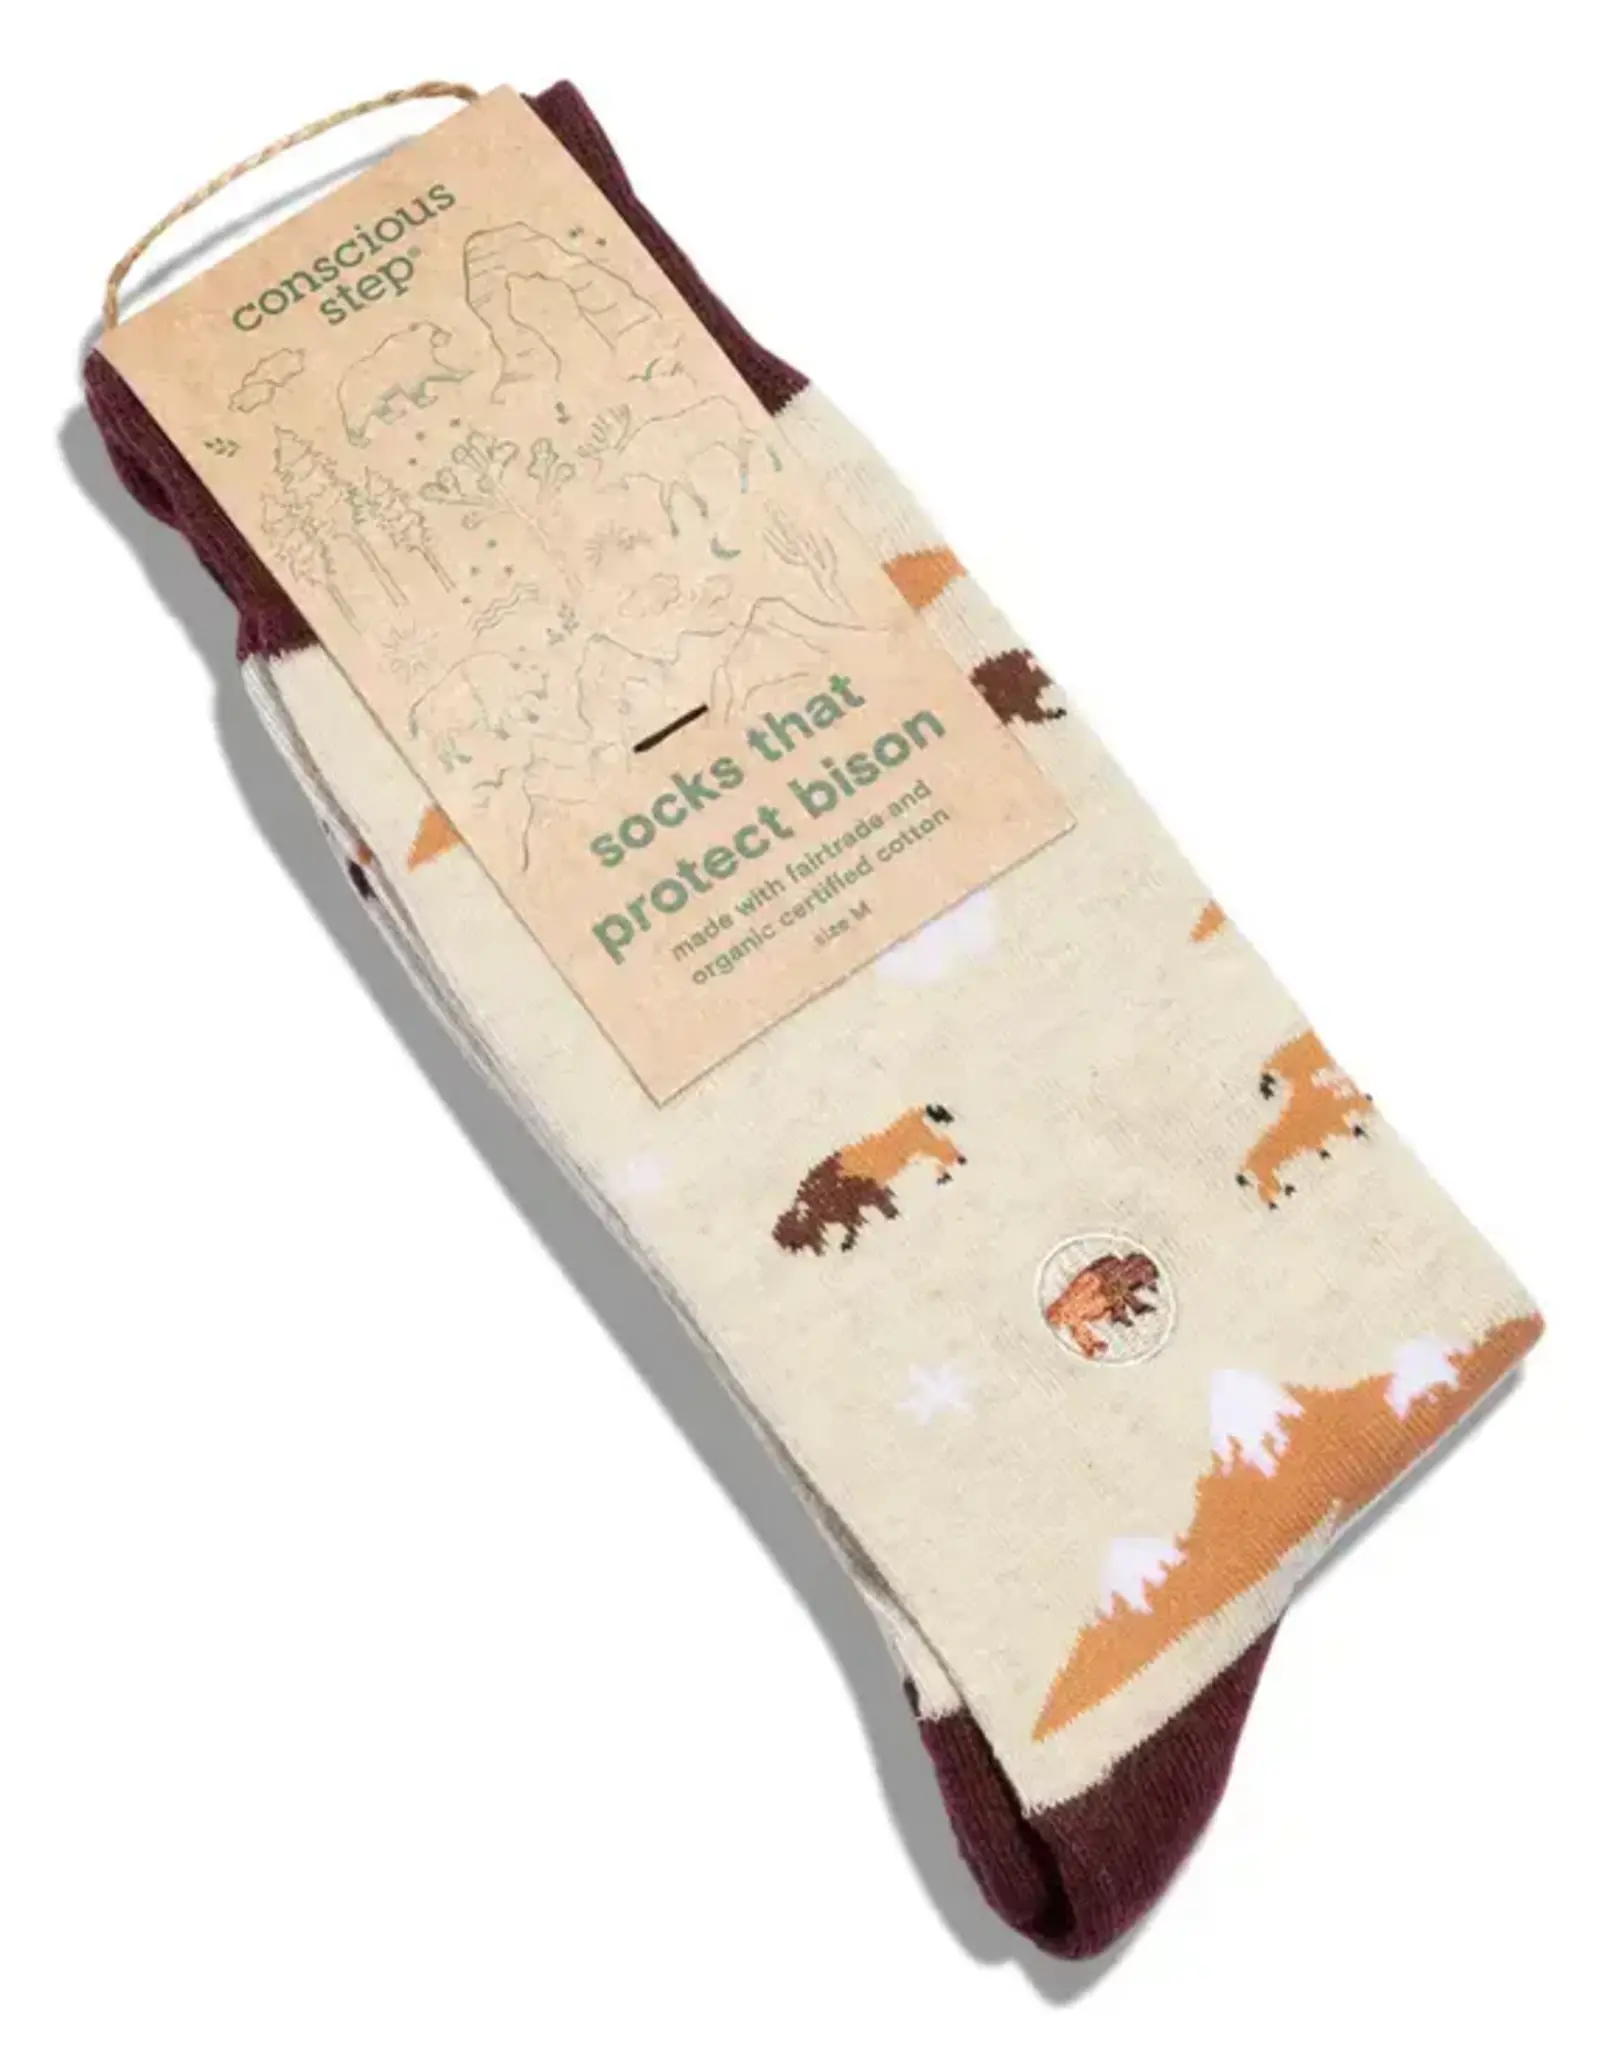 Conscious Step Socks that Protect Bison